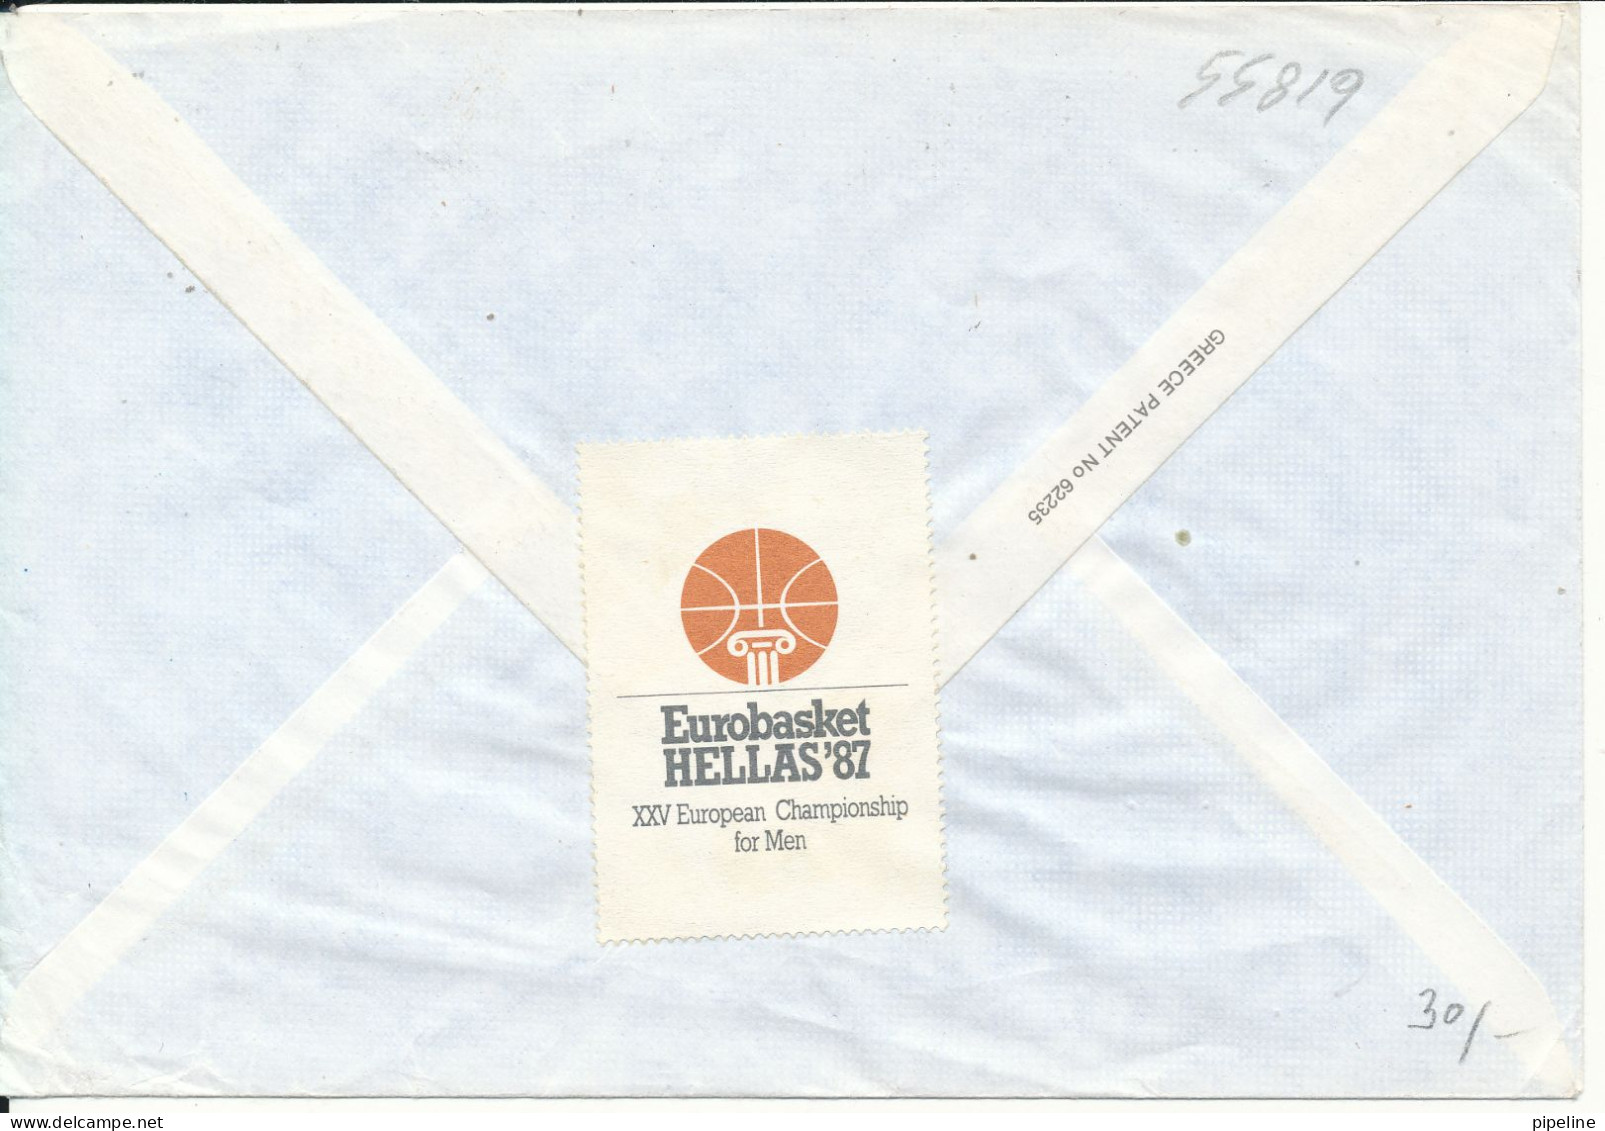 Greece Air Mail Cover Sent To Sweden 3-10-1987 See The BASKETBALL Label On The Backside Of The Cover - Mont Athos